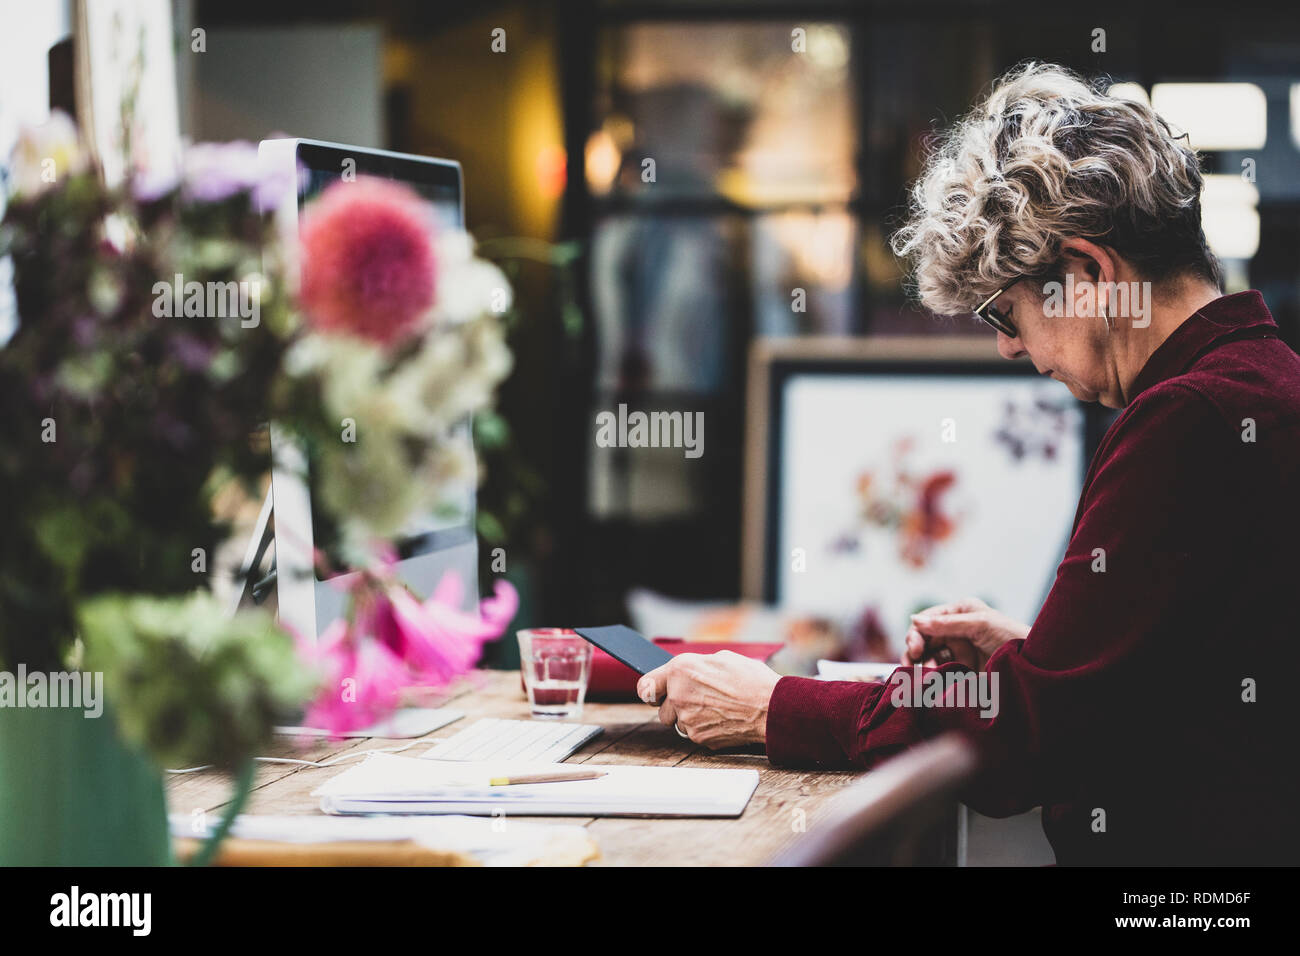 Senior woman wearing glasses and red dress sitting at a wooden table, looking at digital tablet. Stock Photo